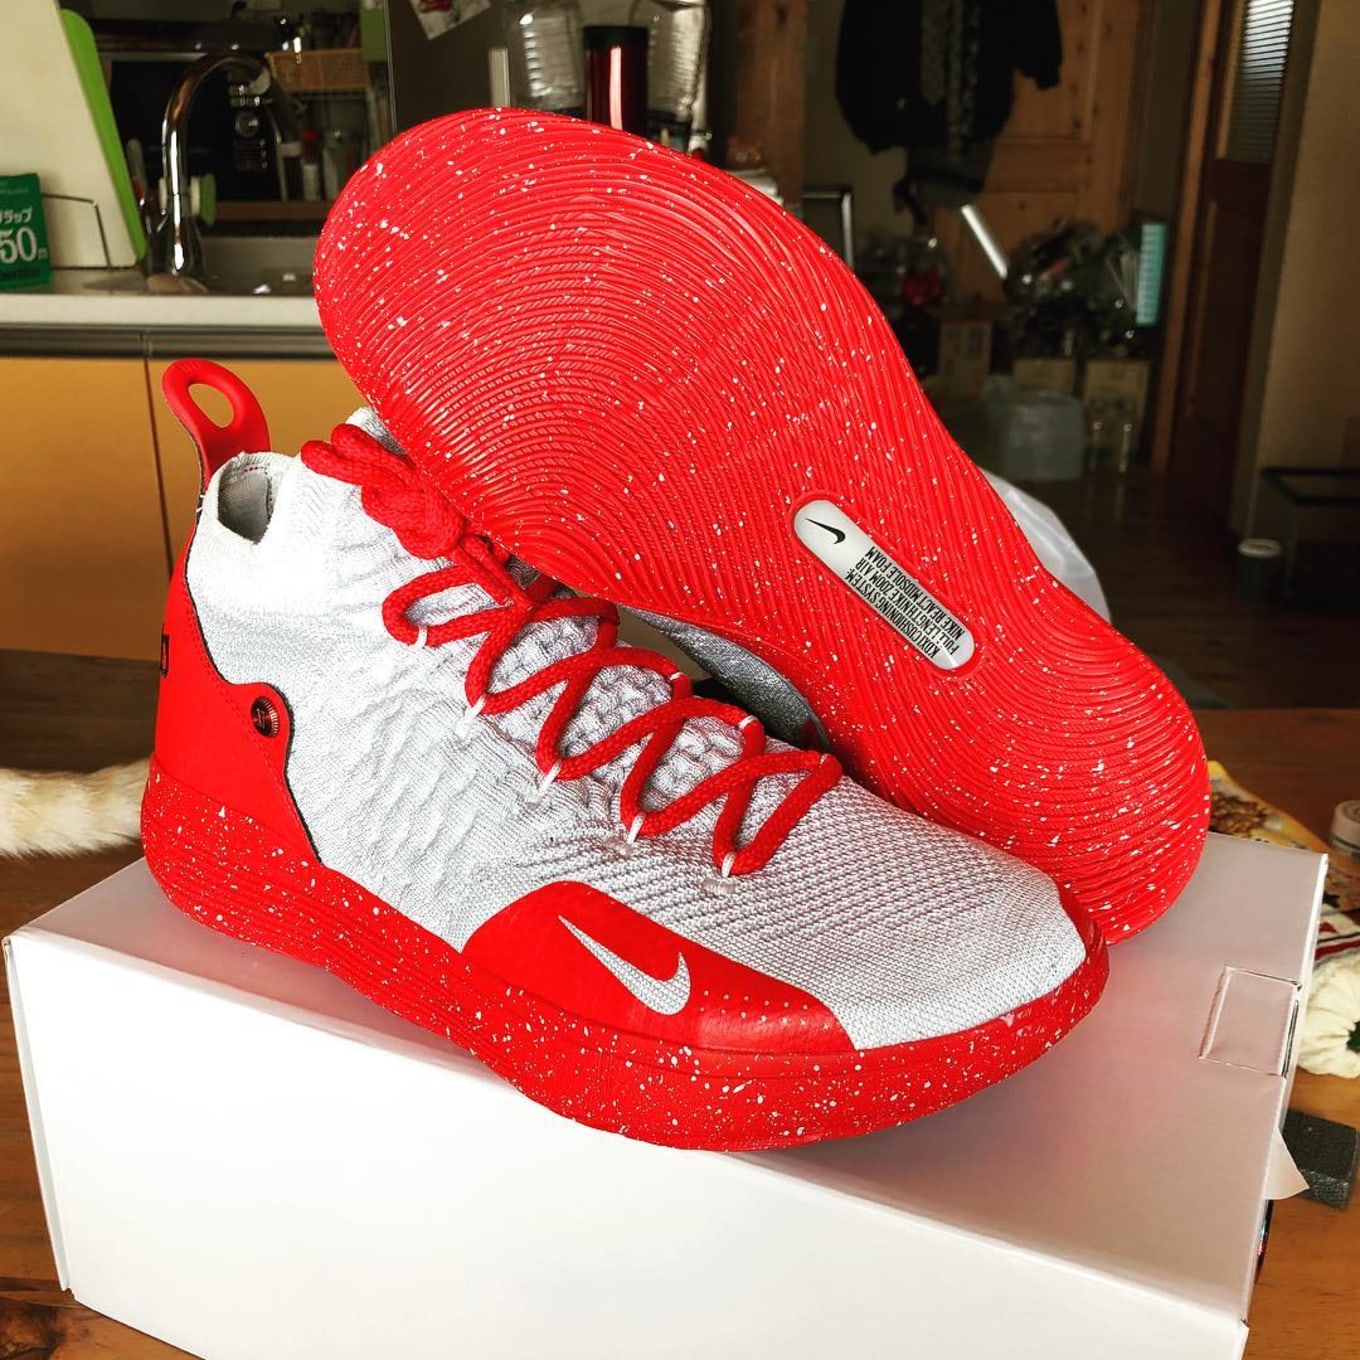 NIKEiD By You 11 Designs | Sole Collector